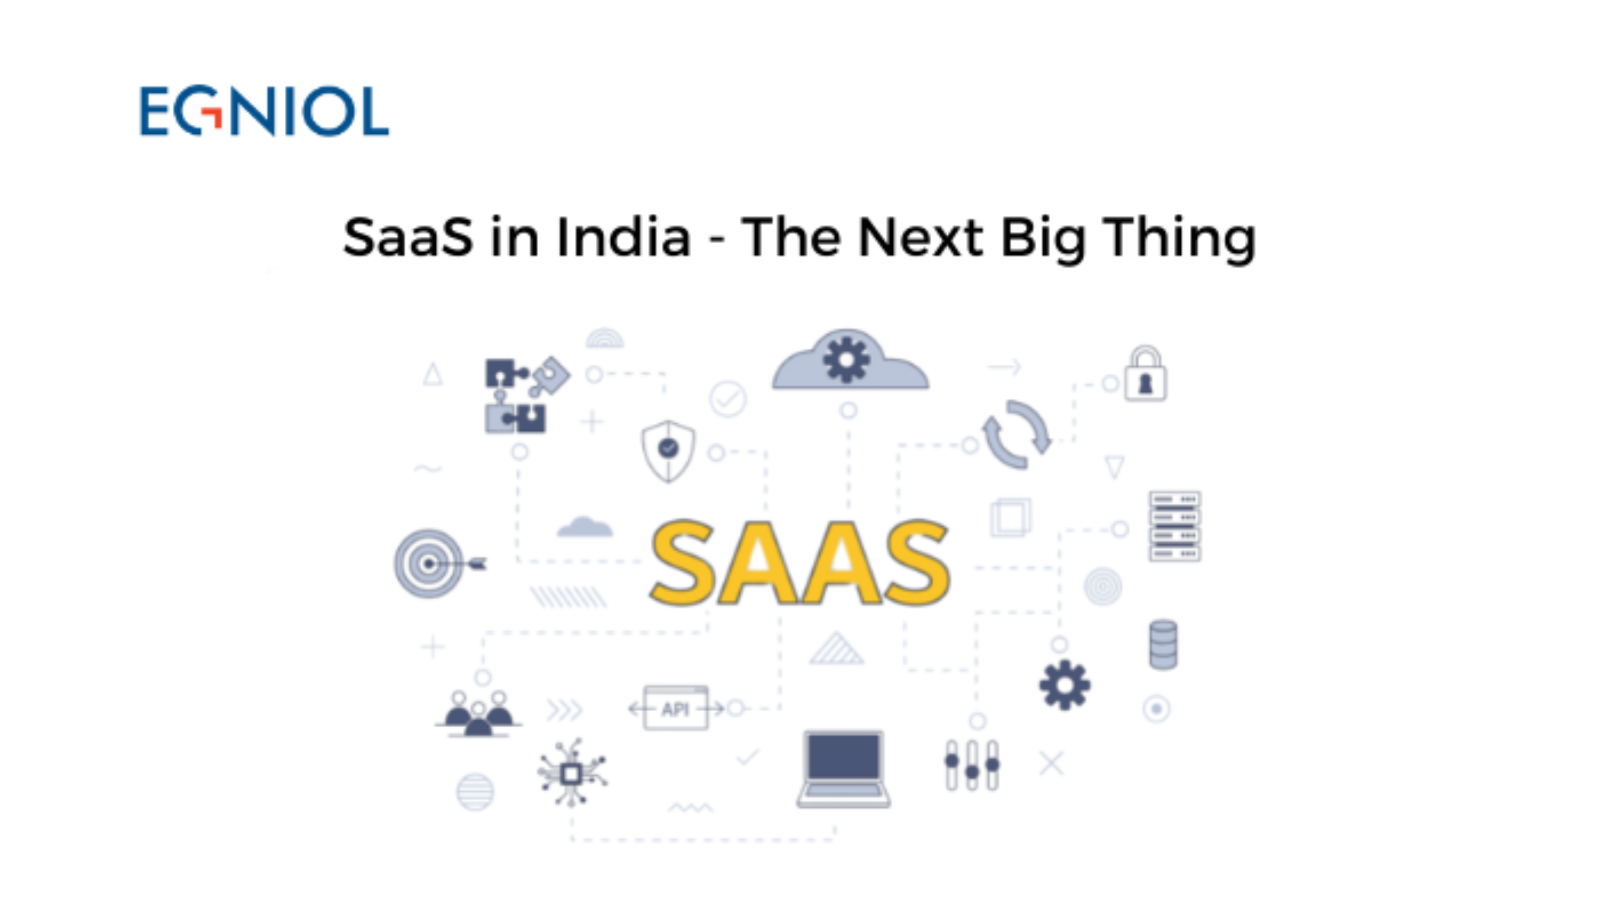 SaaS in India - The Next Big Thing - By Egniol